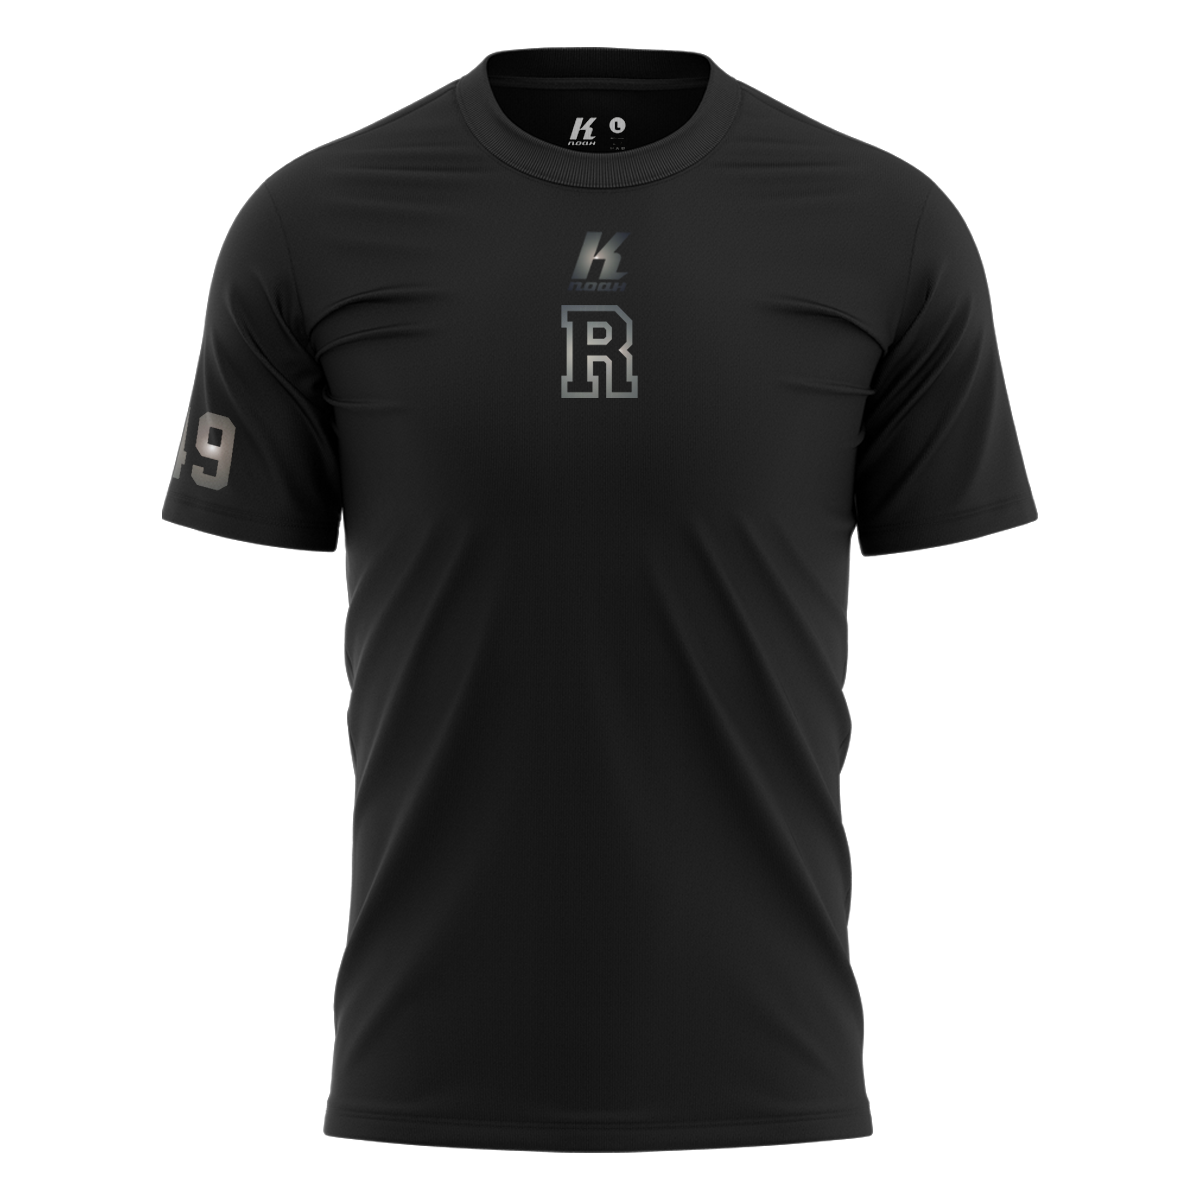 Rangers "Blackline" K.Tech Sports Tee S8000 with Playernumber/Initials